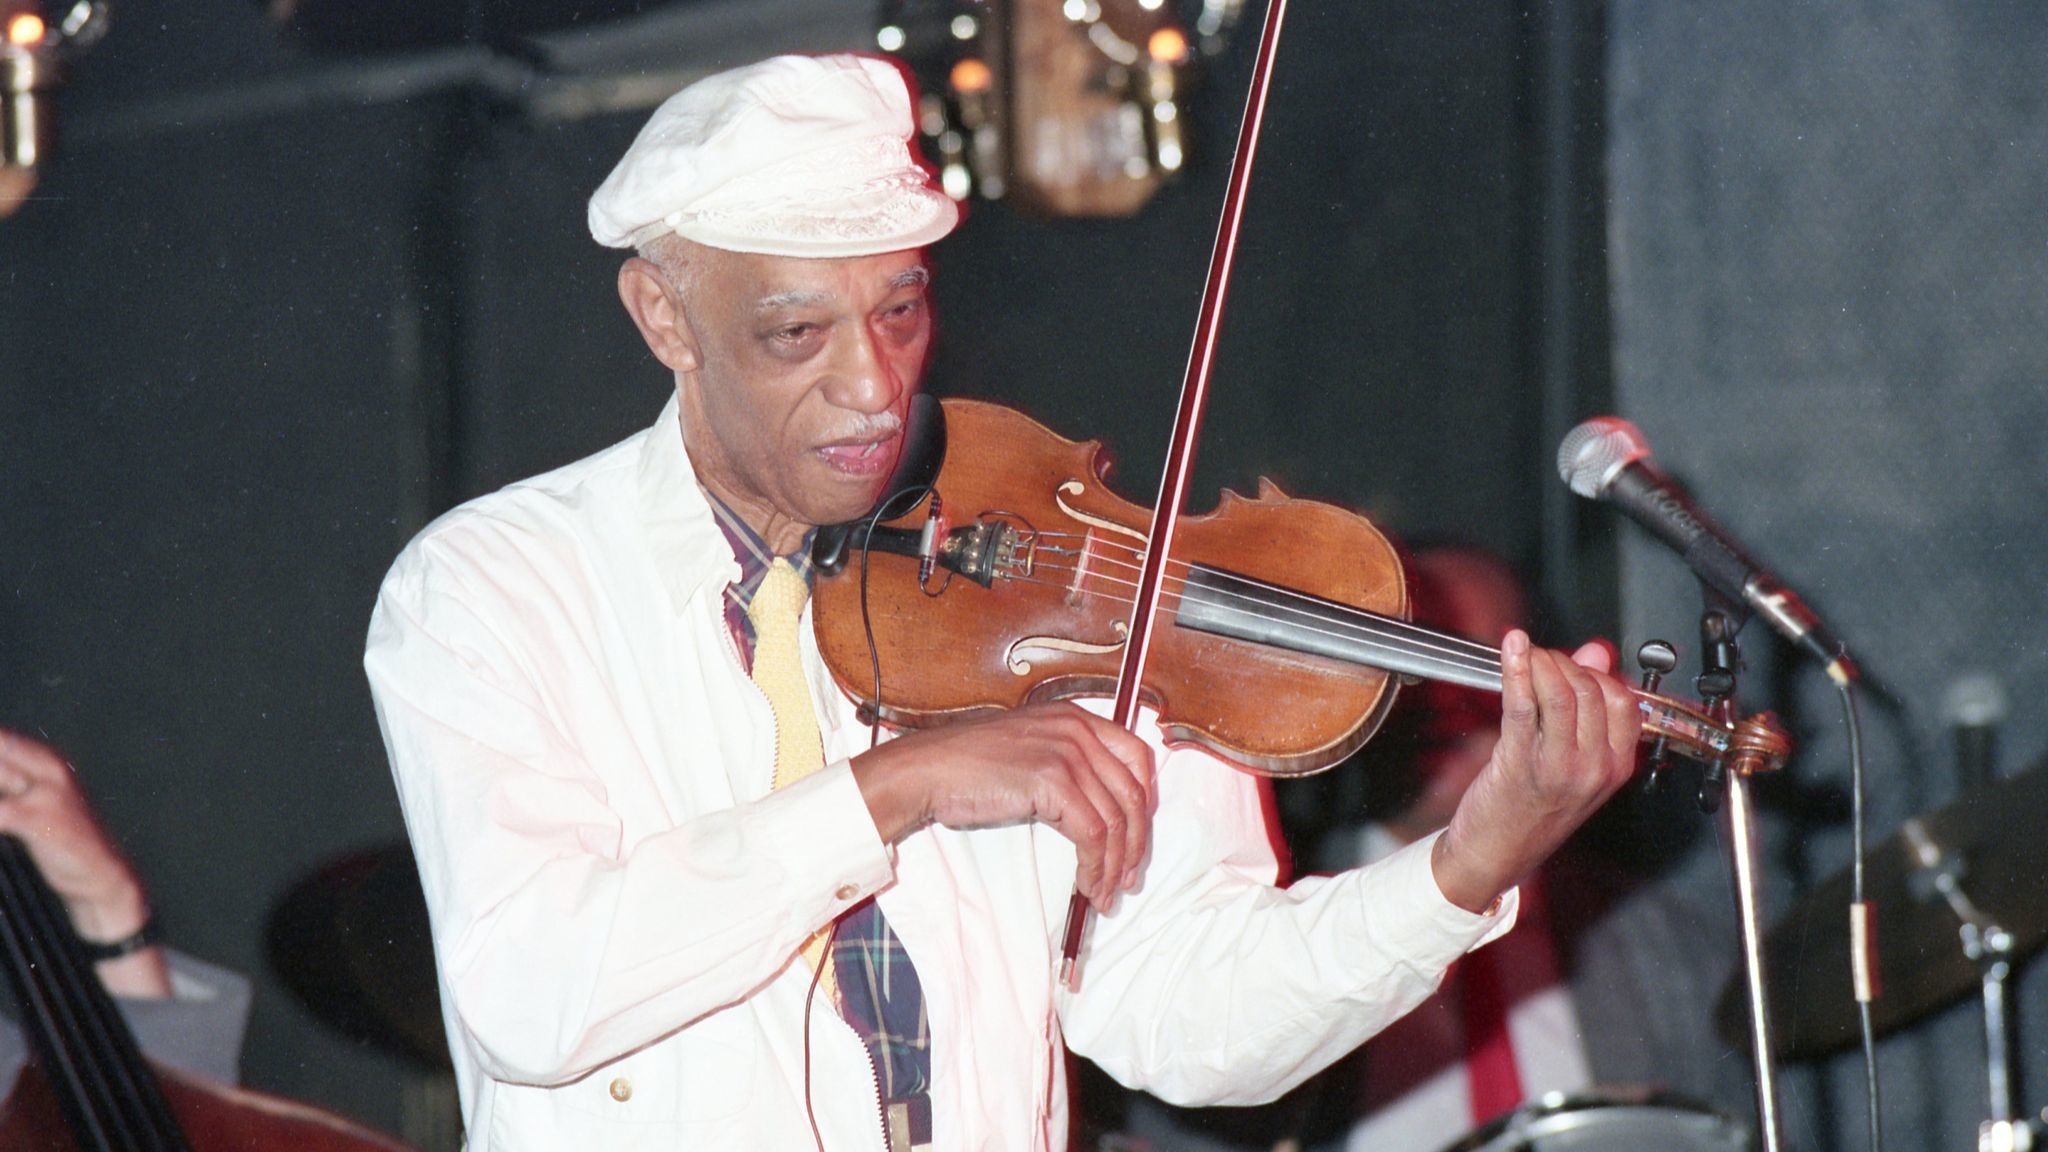 Jazz, blues and rock music legend Papa John Creach, shown playing Elario's in 1988, was at one time a member of both Jefferson Airplane and Hot Tuna.